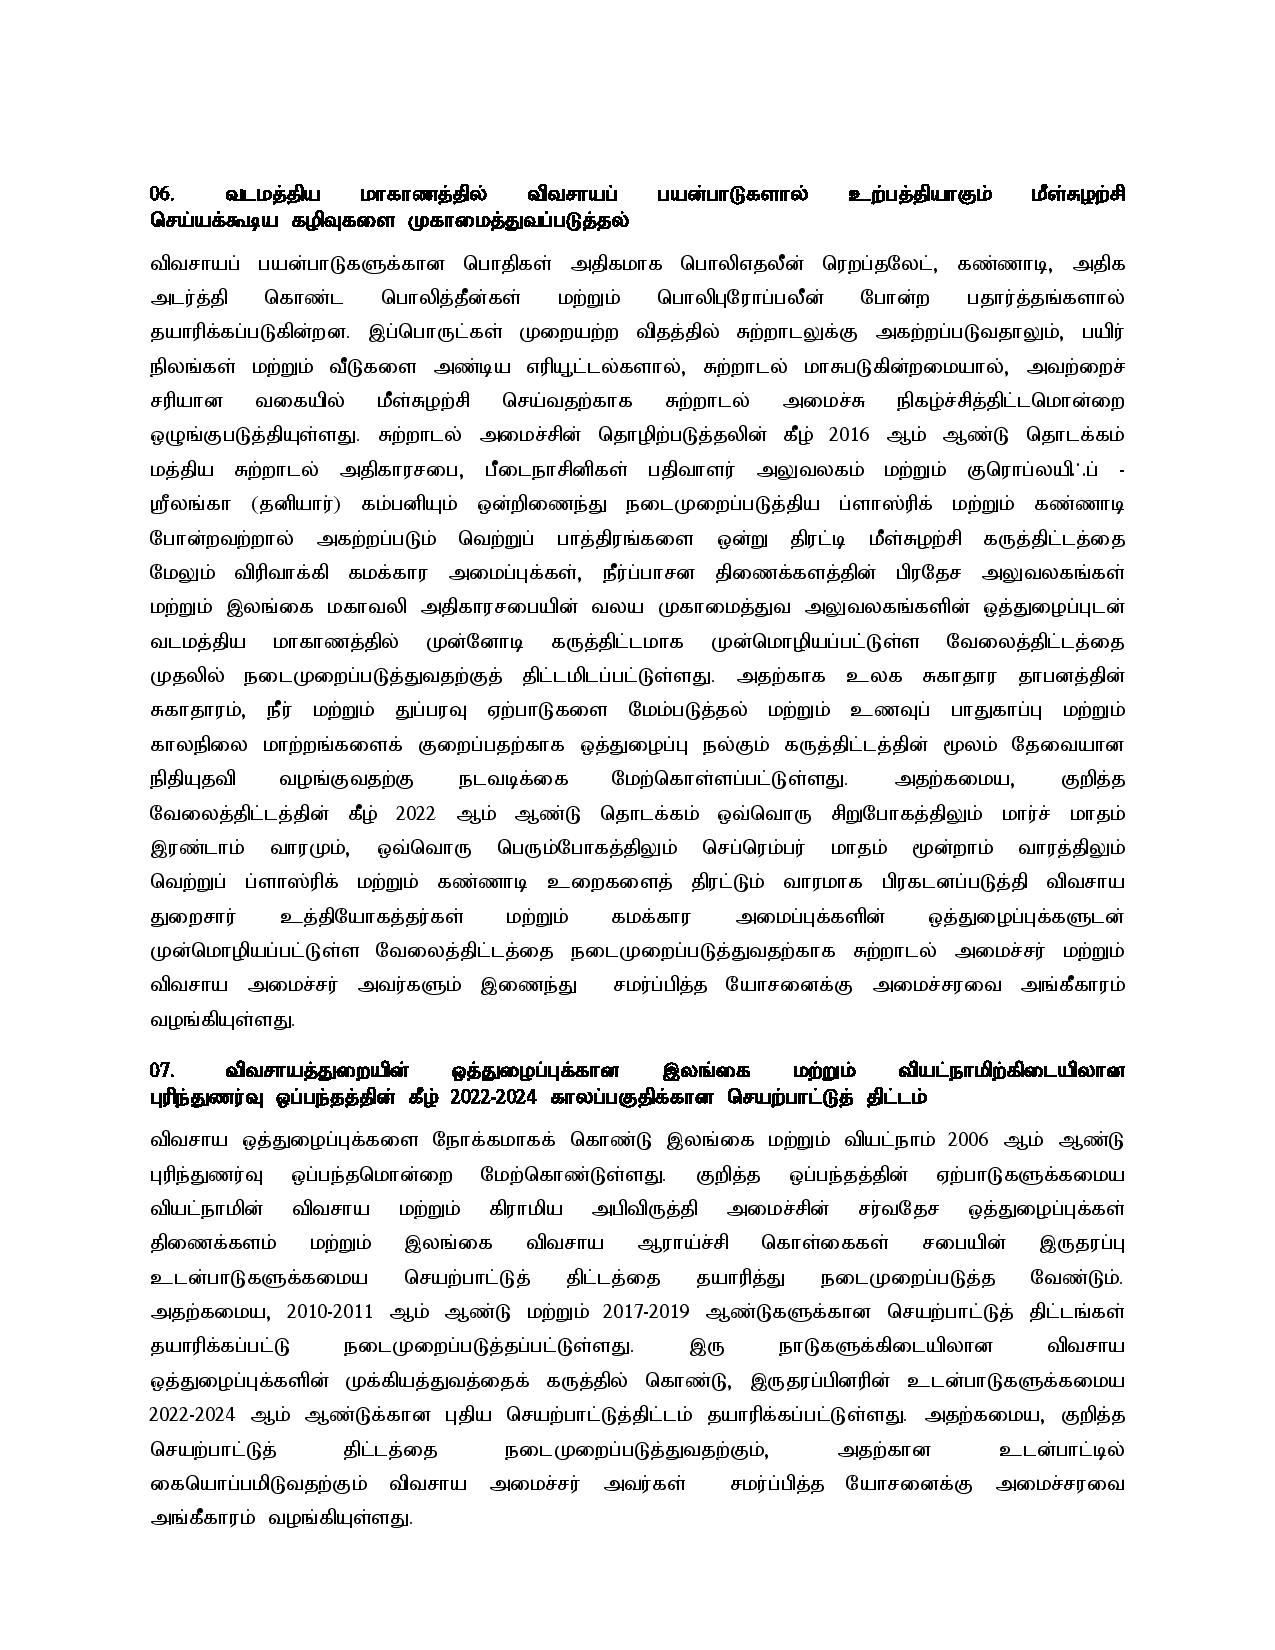 Cabinet Decisions on 21.09.2021 Tamil page 003